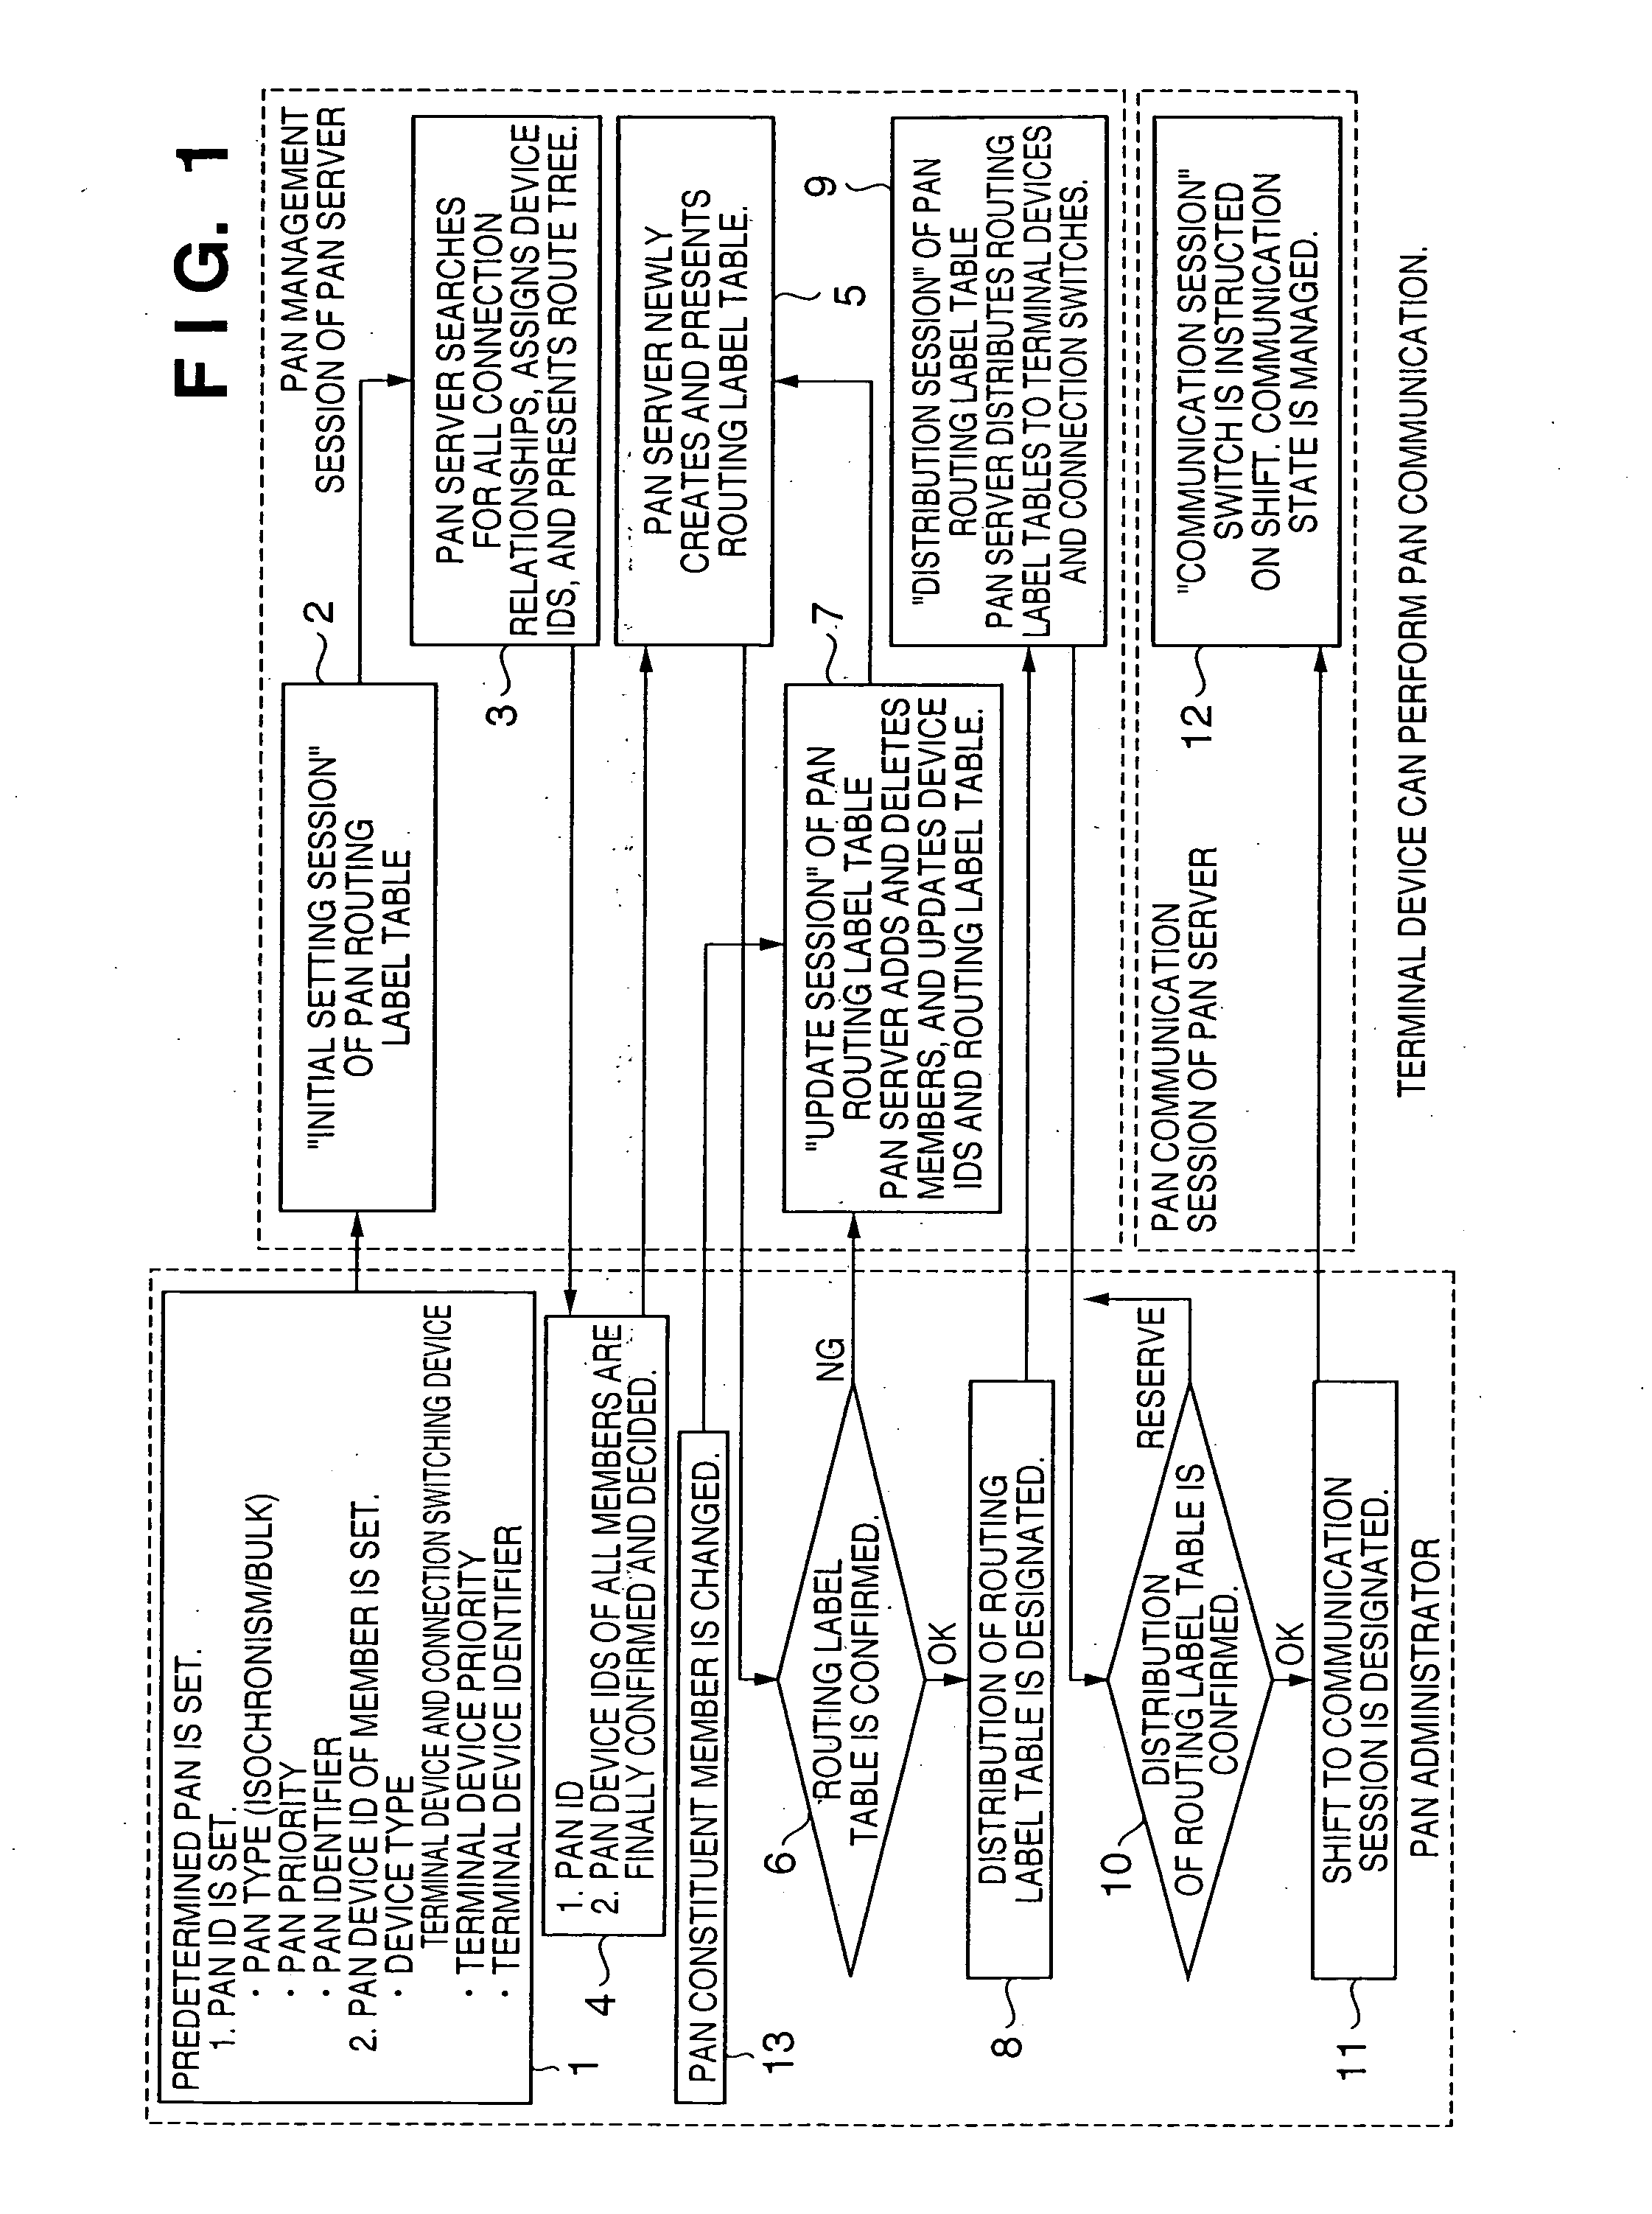 Network switching apparatus, route management server, network interface apparatus, control method therefor, computer program for route management server, and computer-readable storage medium